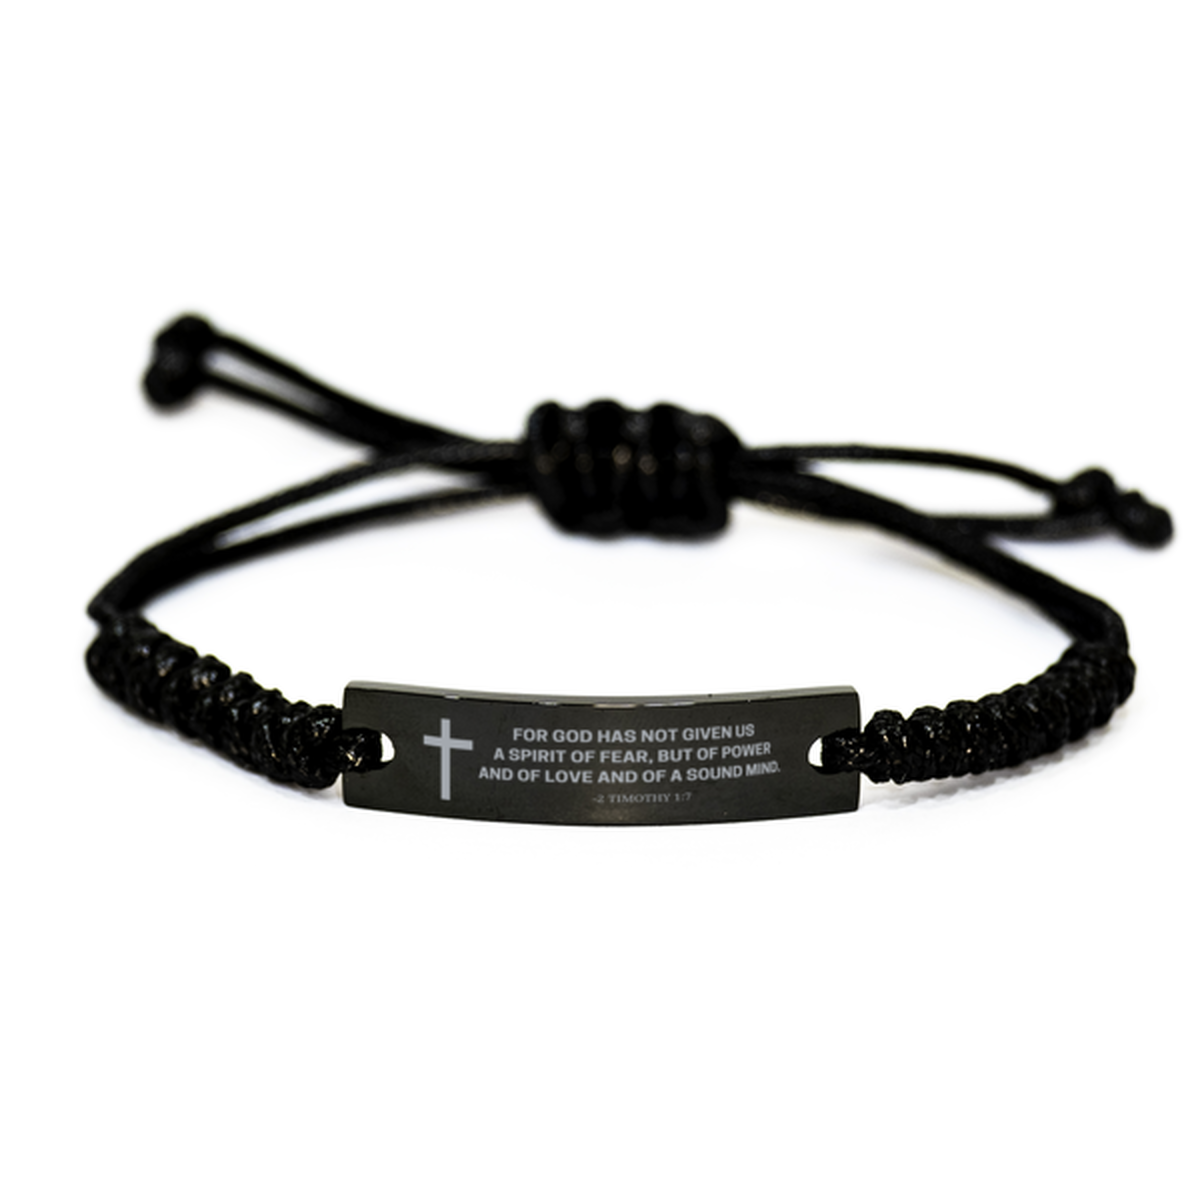 Baptism Gifts For Teenage Boys Girls, Christian Bible Verse Black Rope Bracelet, For God has not given us, Catholic Confirmation Gifts for Son, Godson, Grandson, Nephew